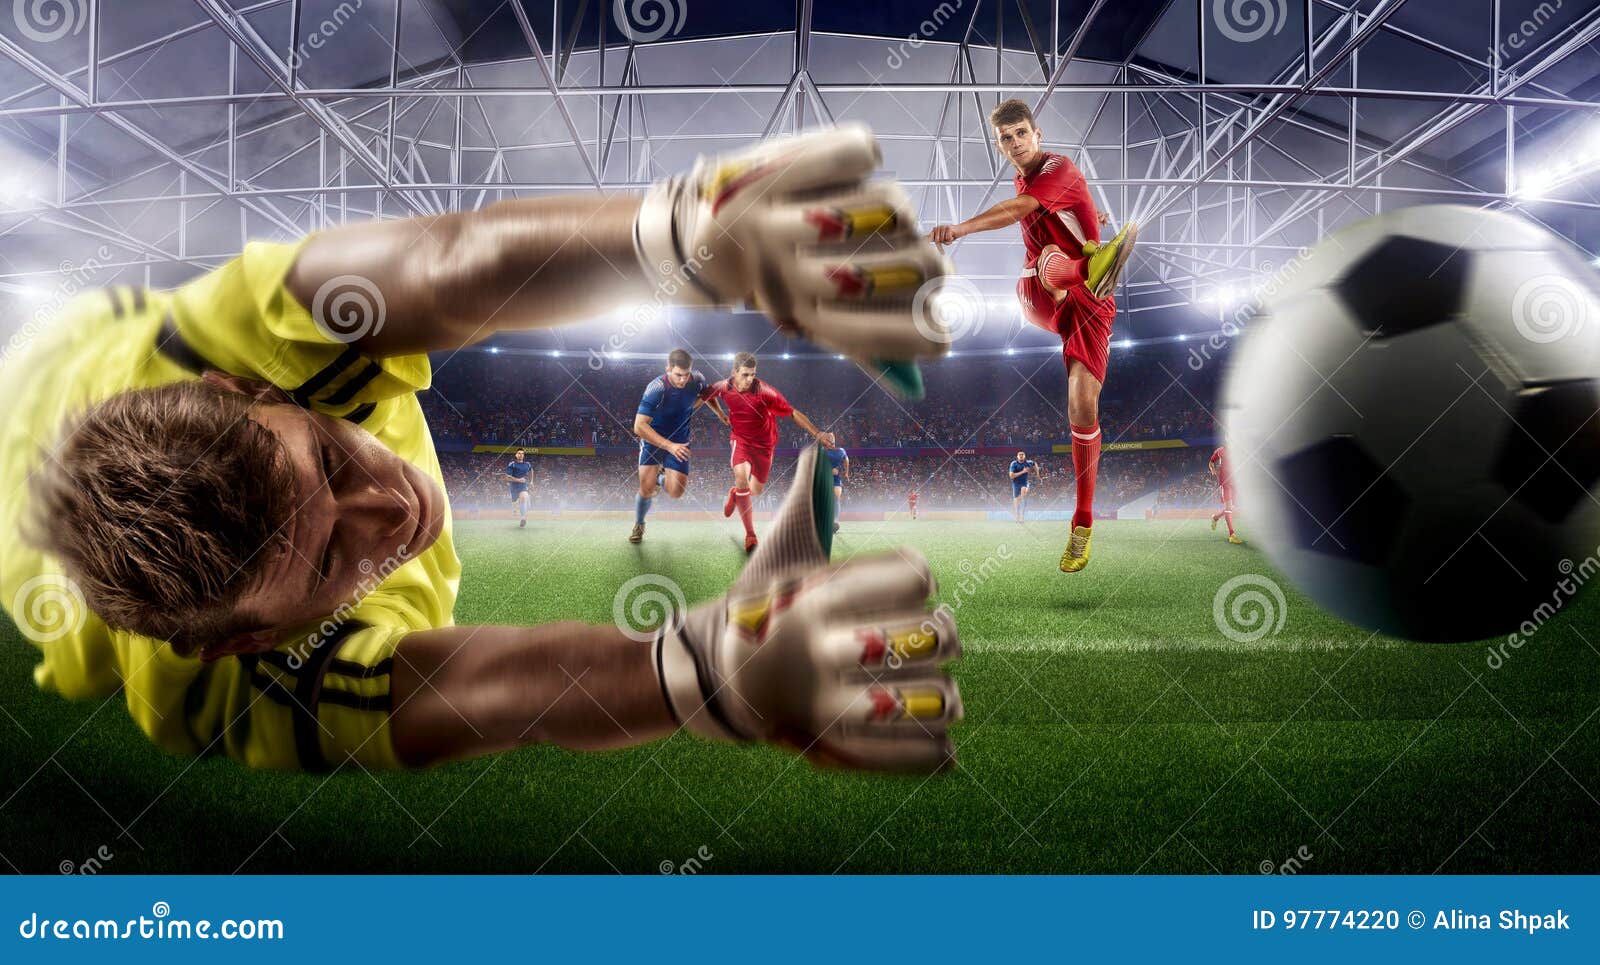 soccer action on 3d sport arena. mature players fight for the ball.